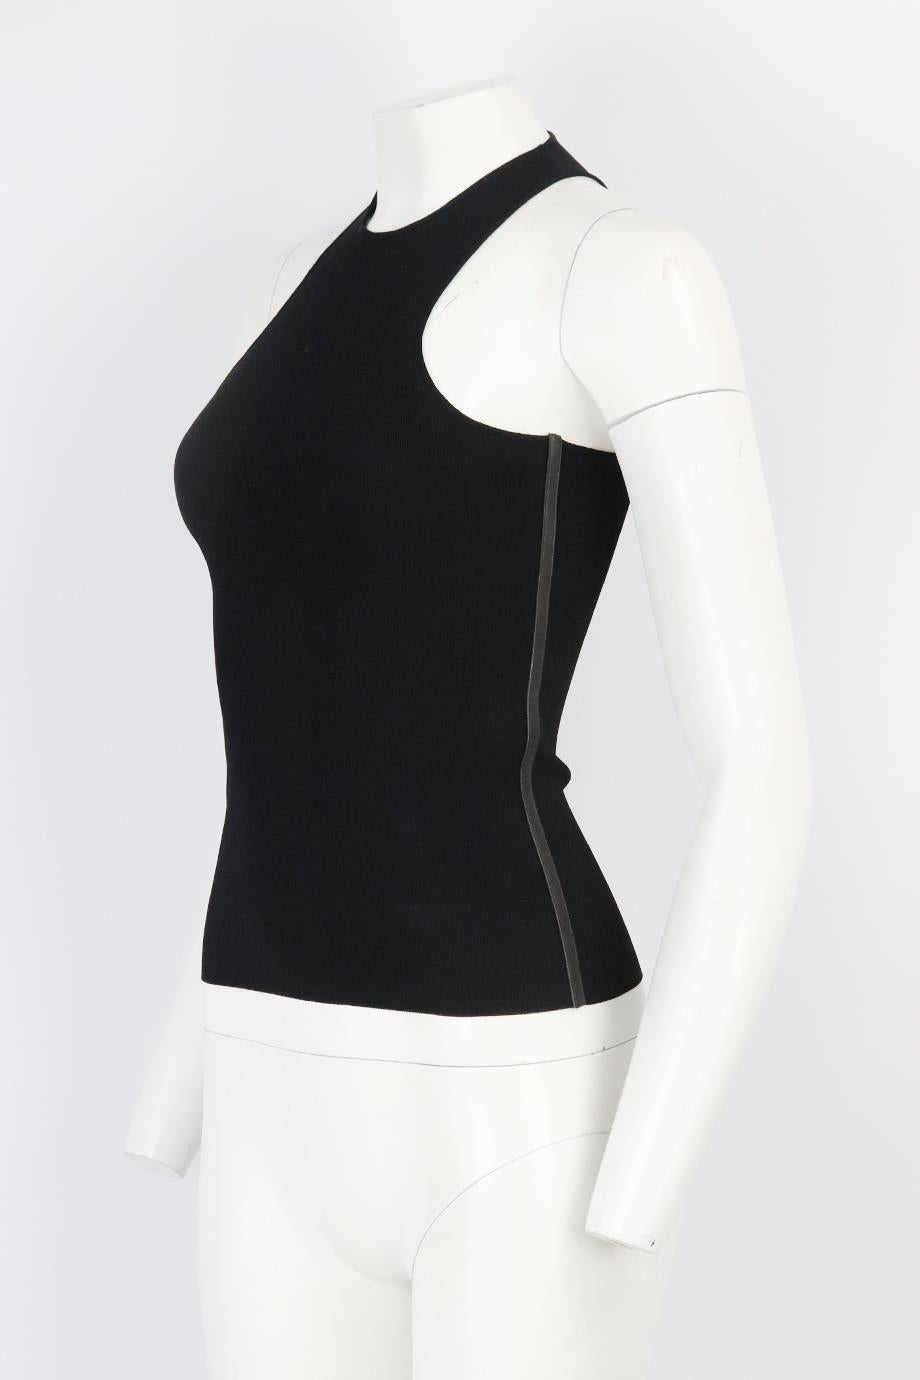 TOM FORD LEATHER TRIMMED STRETCH KNIT TOP XXSMALL